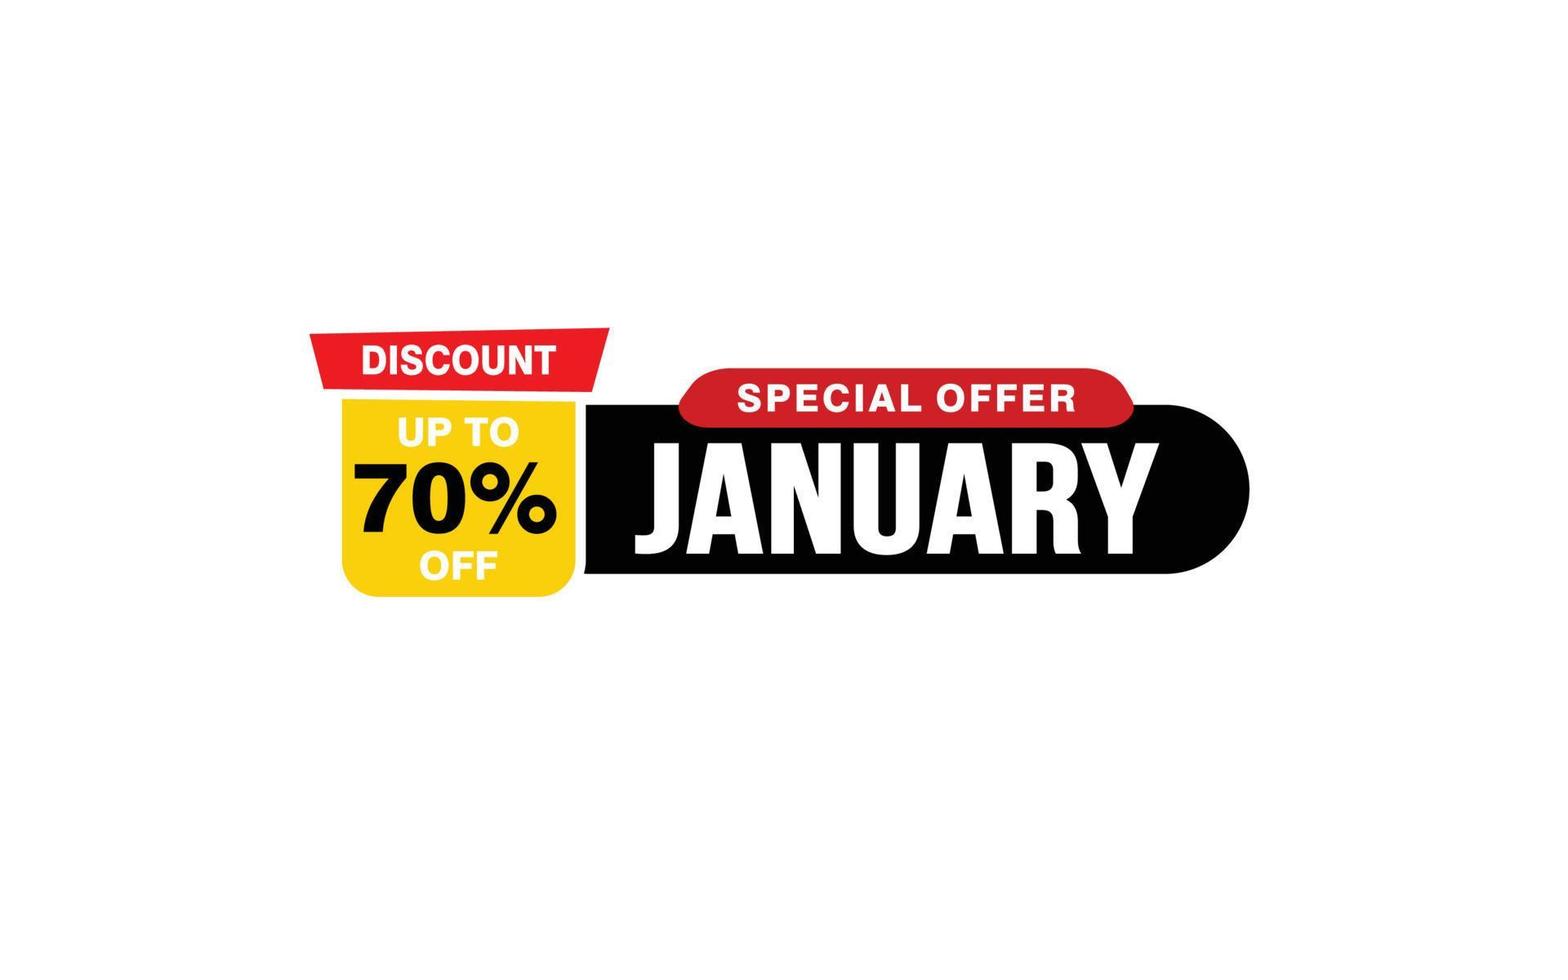 70 Percent JANUARY discount offer, clearance, promotion banner layout with sticker style. vector